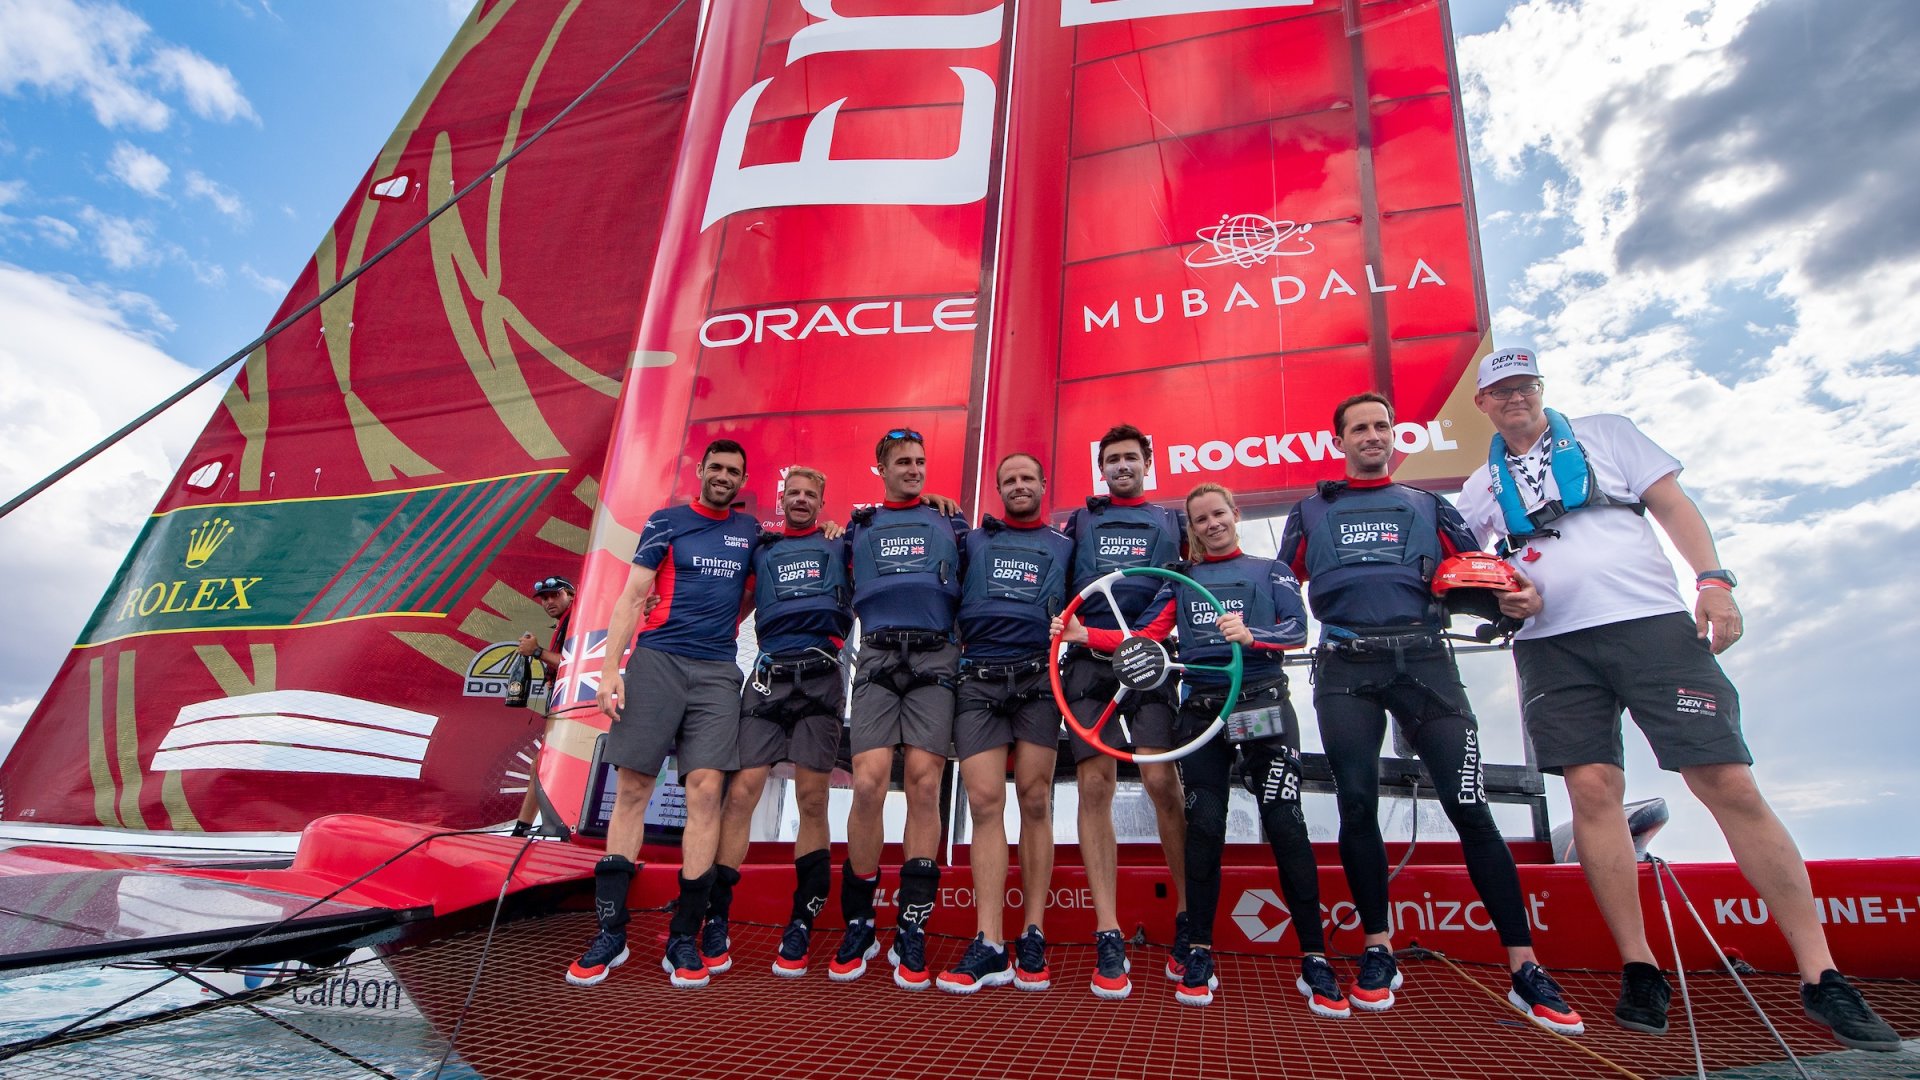 Emirates GBR triumphs in Italy as light winds terminate Taranto Final 